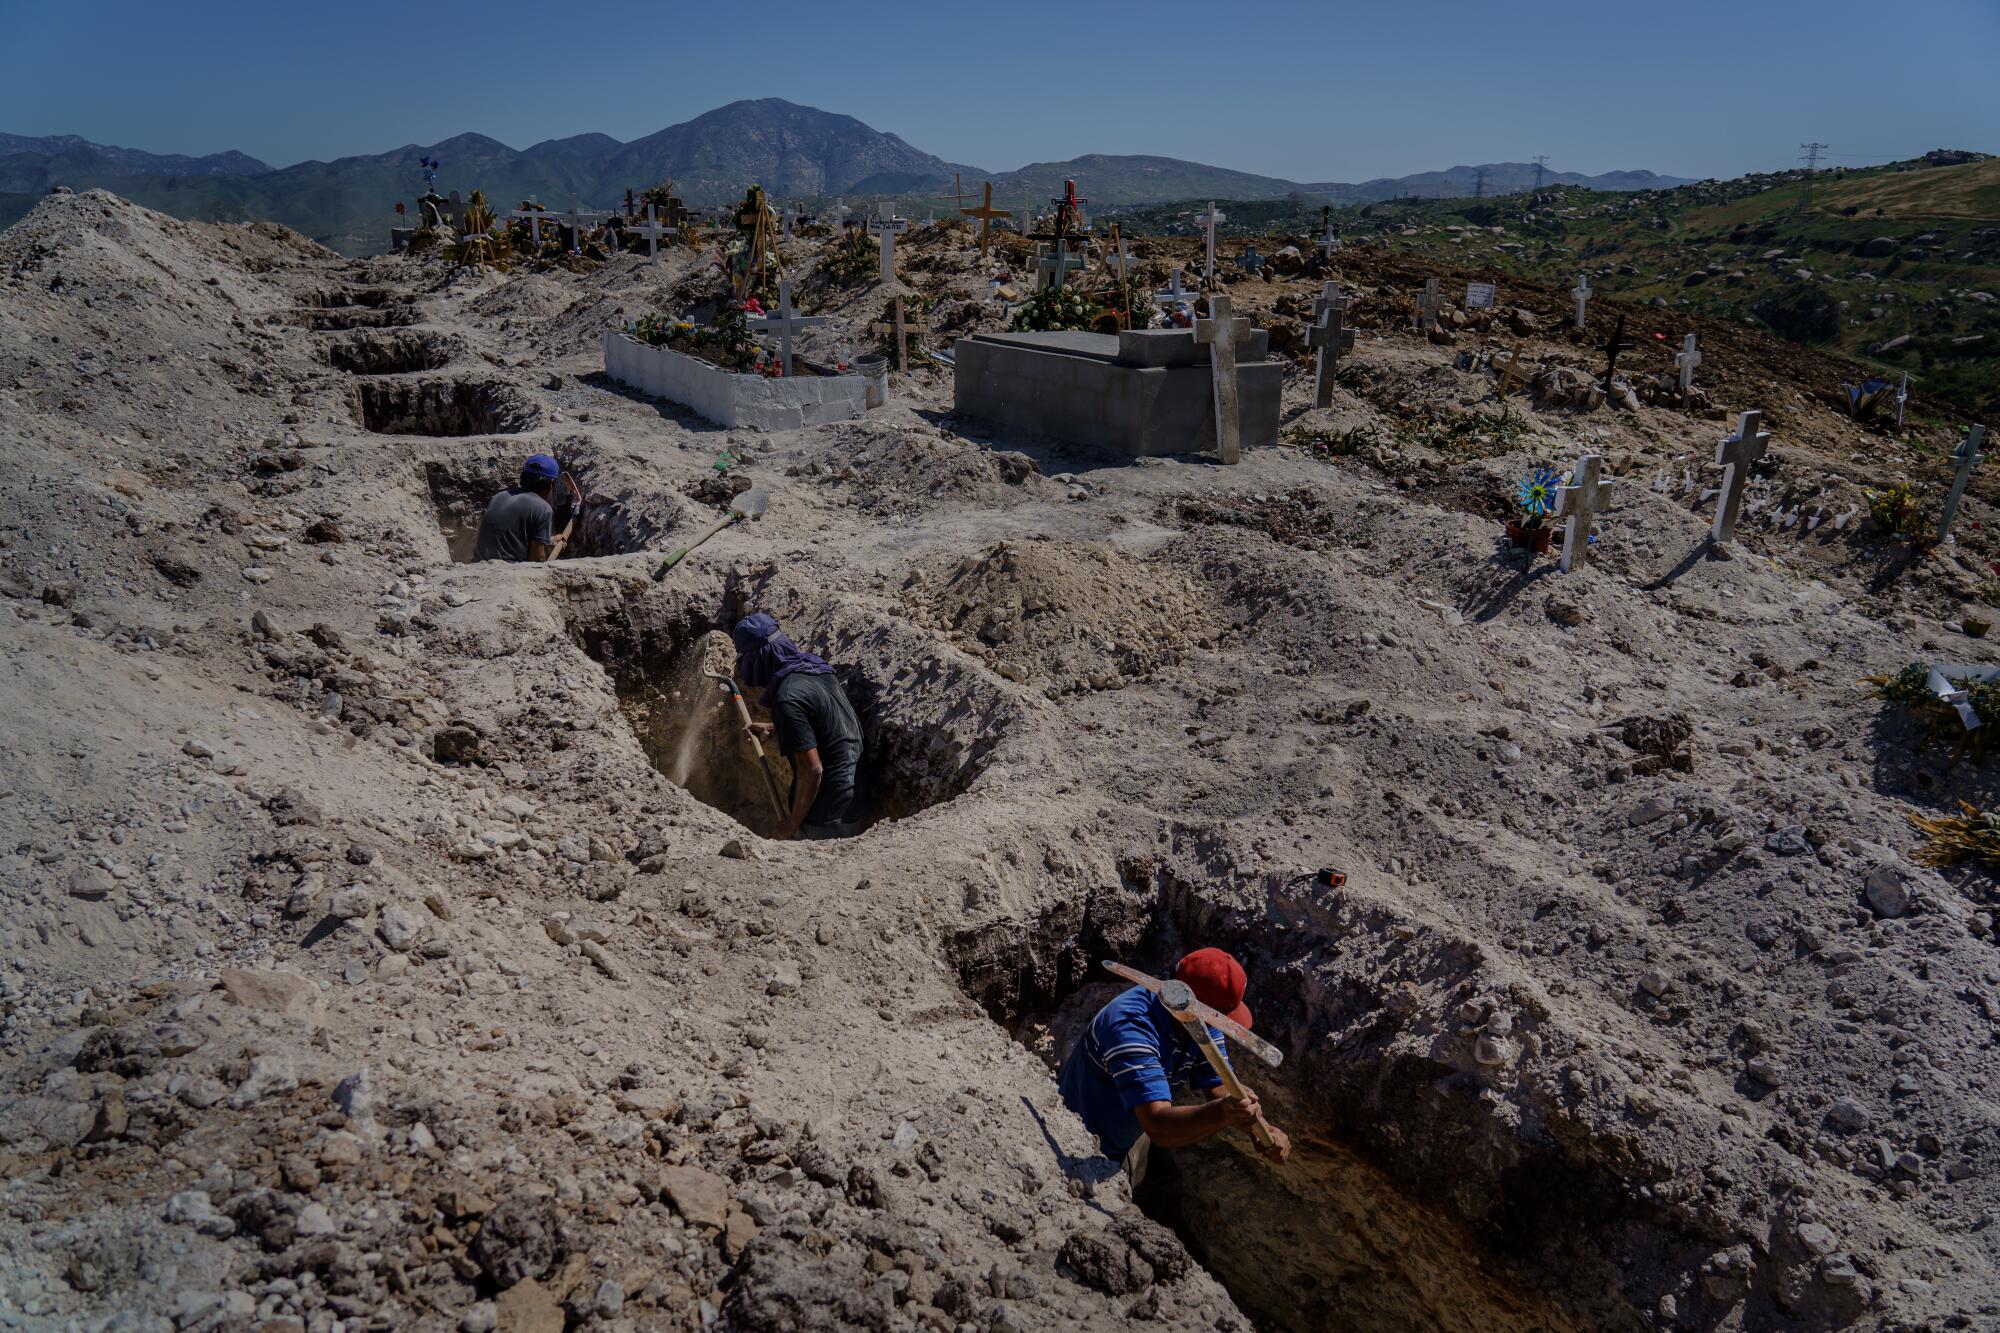 Cemetery workers dig holes ahead of time for a new crop of graves at the municipal pantheon number 13 cemetery, in Tijuana, Mexico, on April 27, 2020.